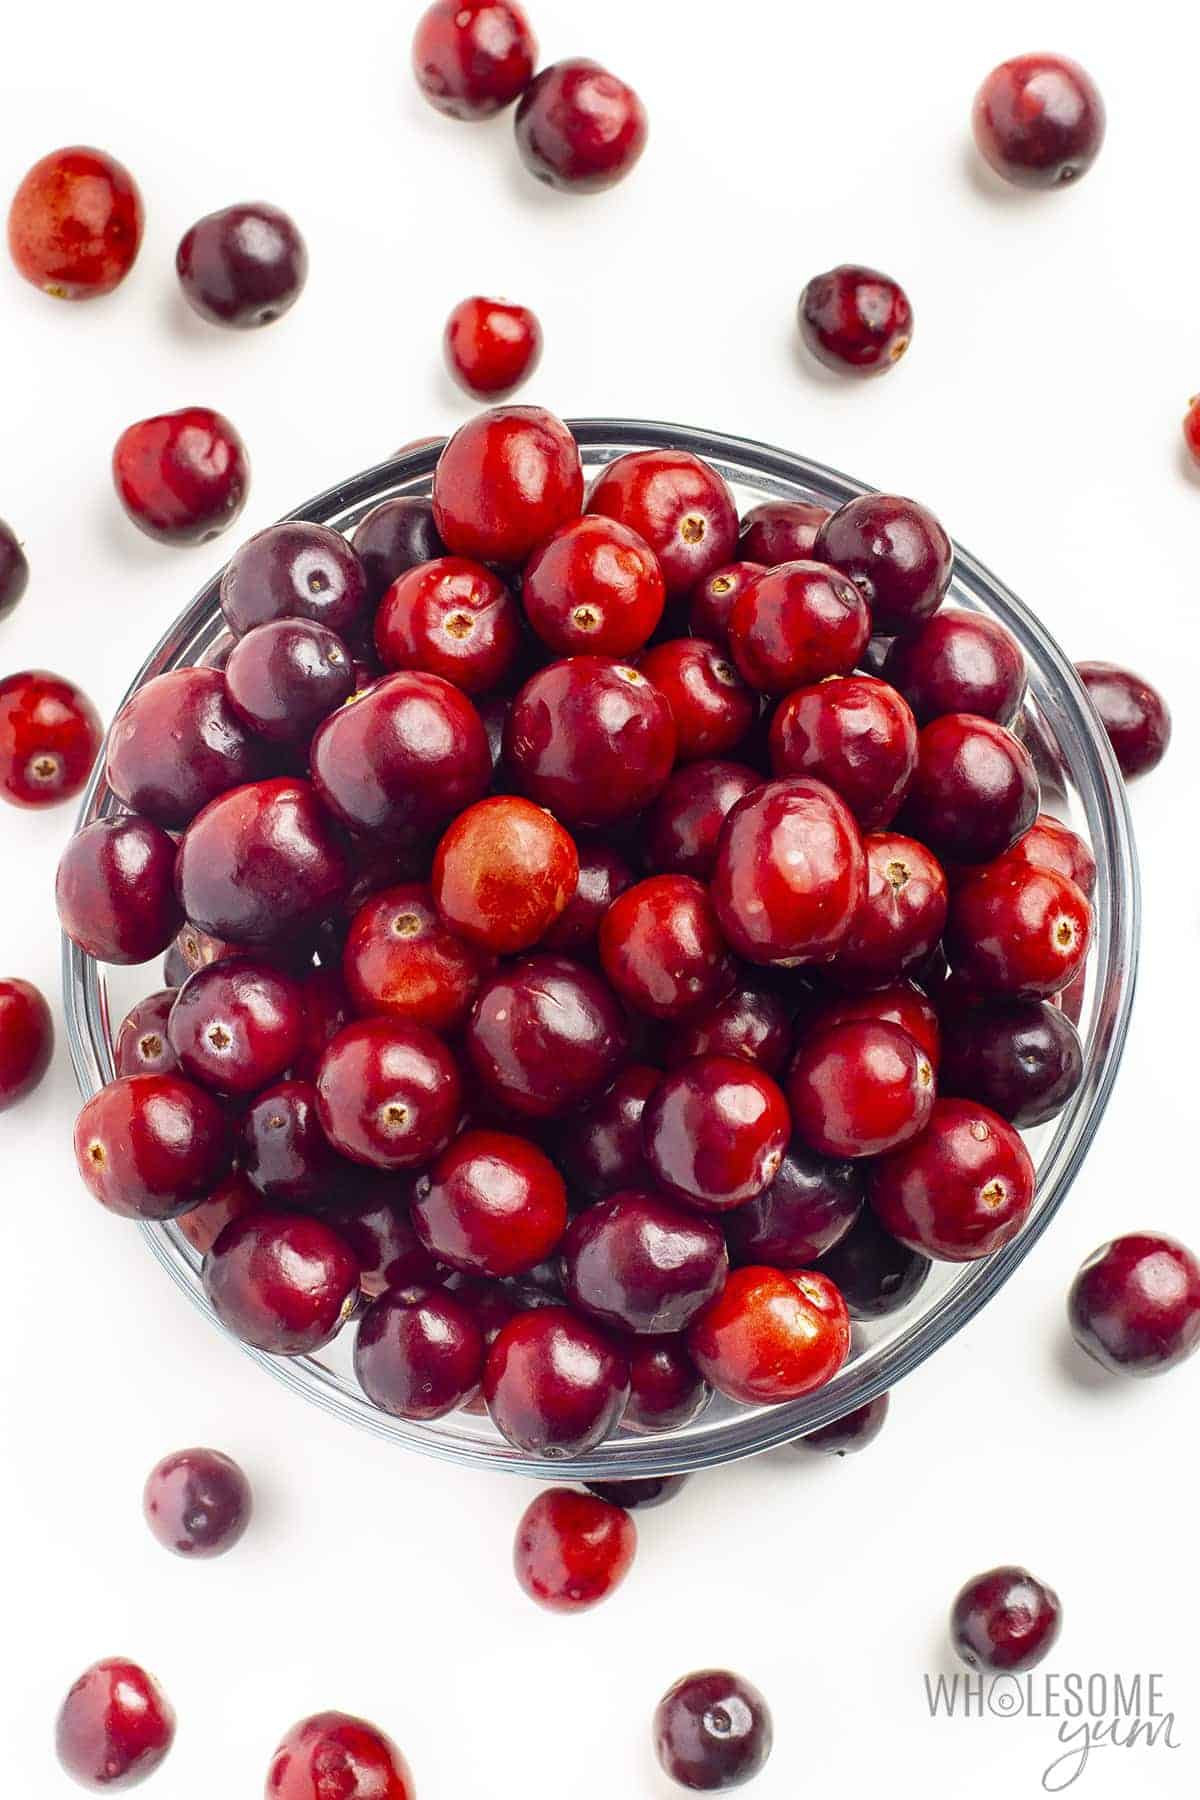 Are cranberries keto? These fresh cranberries are naturally keto friendly.